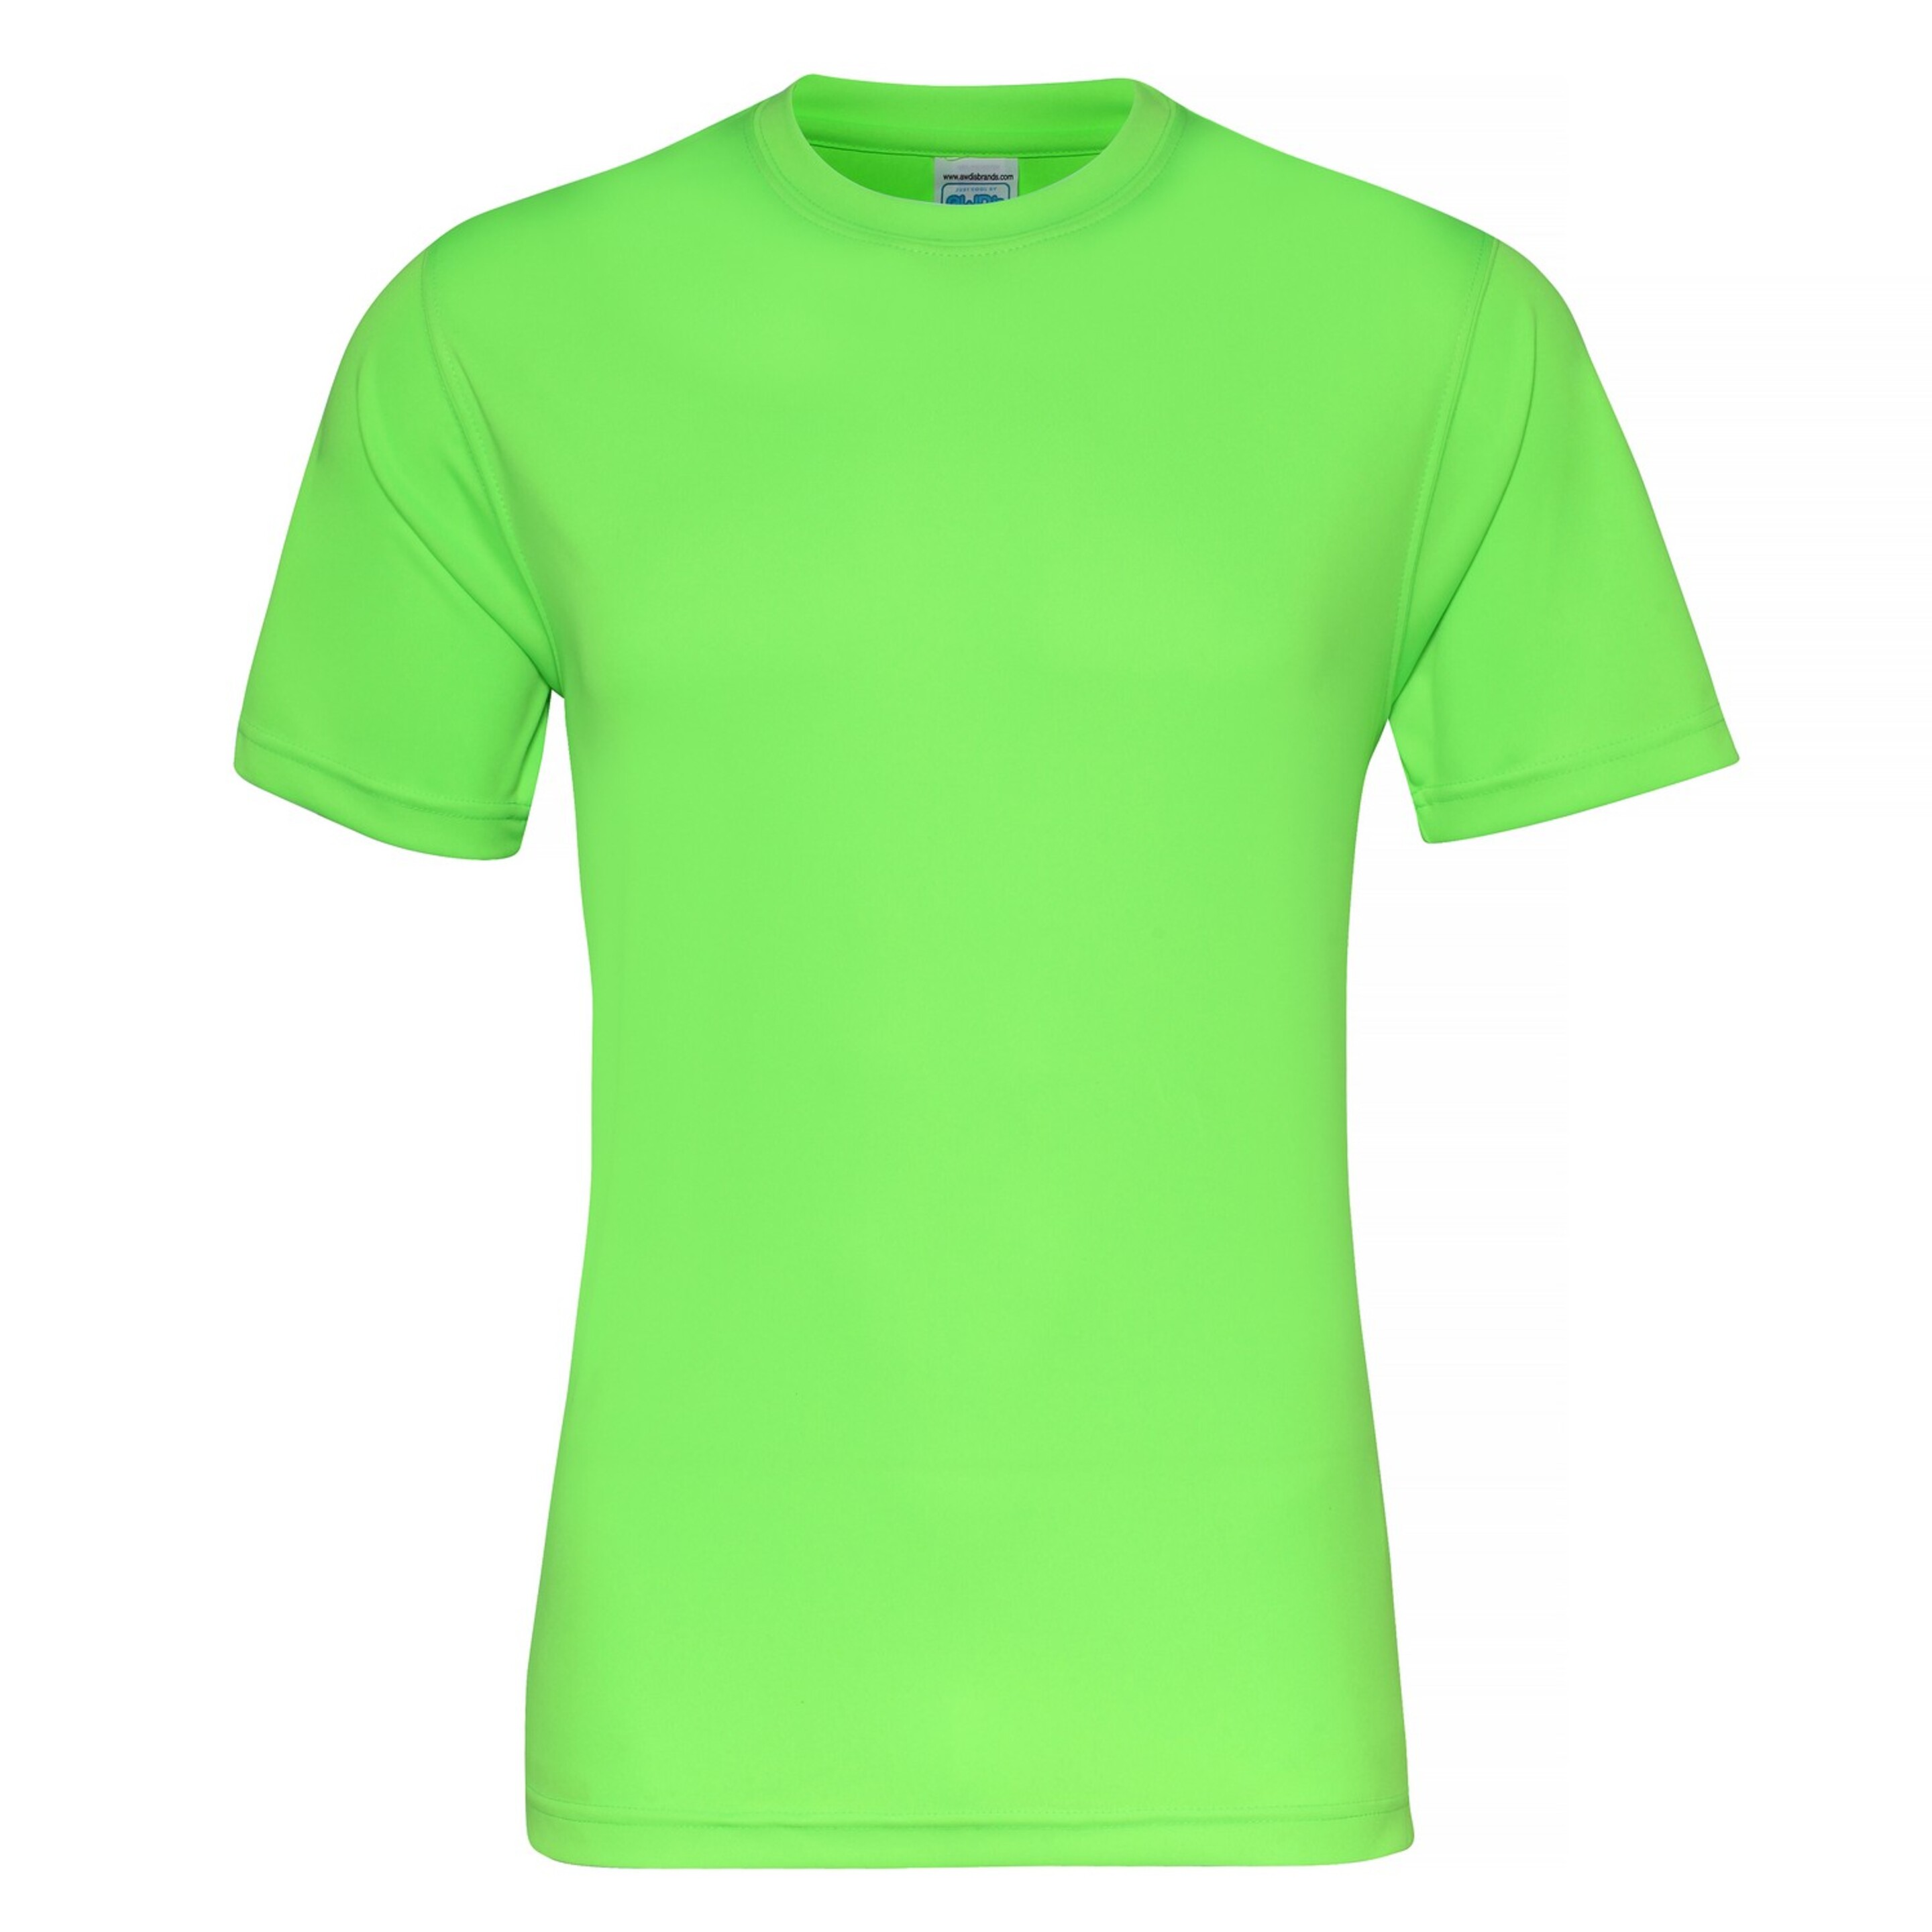 T-shirt Smooth Just Cool Awdis - verde - 